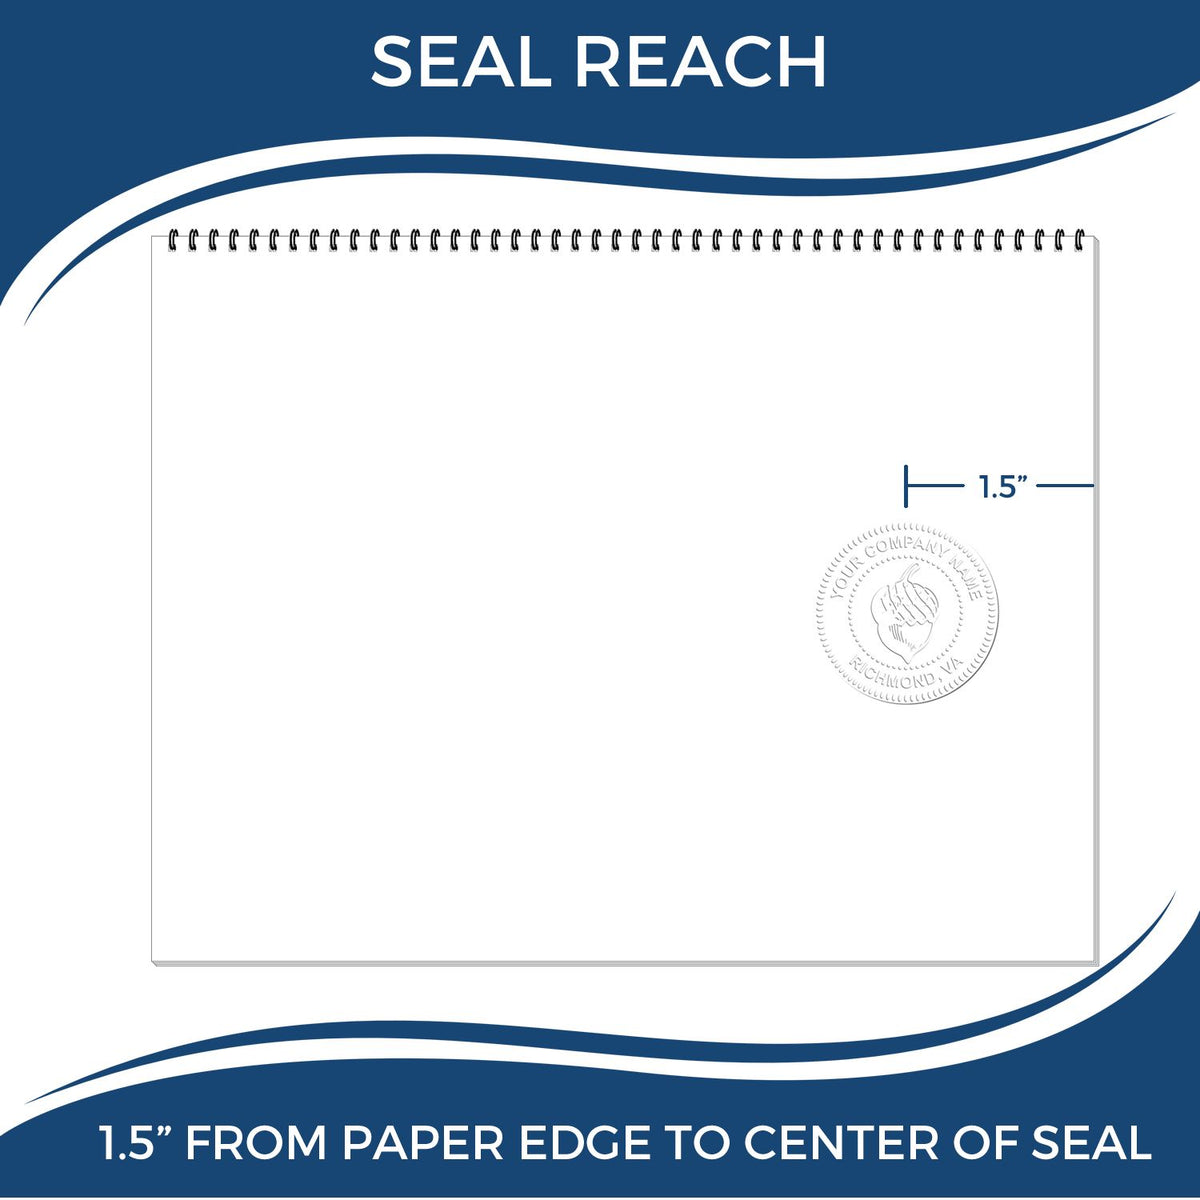 An infographic showing the seal reach which is represented by a ruler and a miniature seal image of the Handheld Maine Land Surveyor Seal